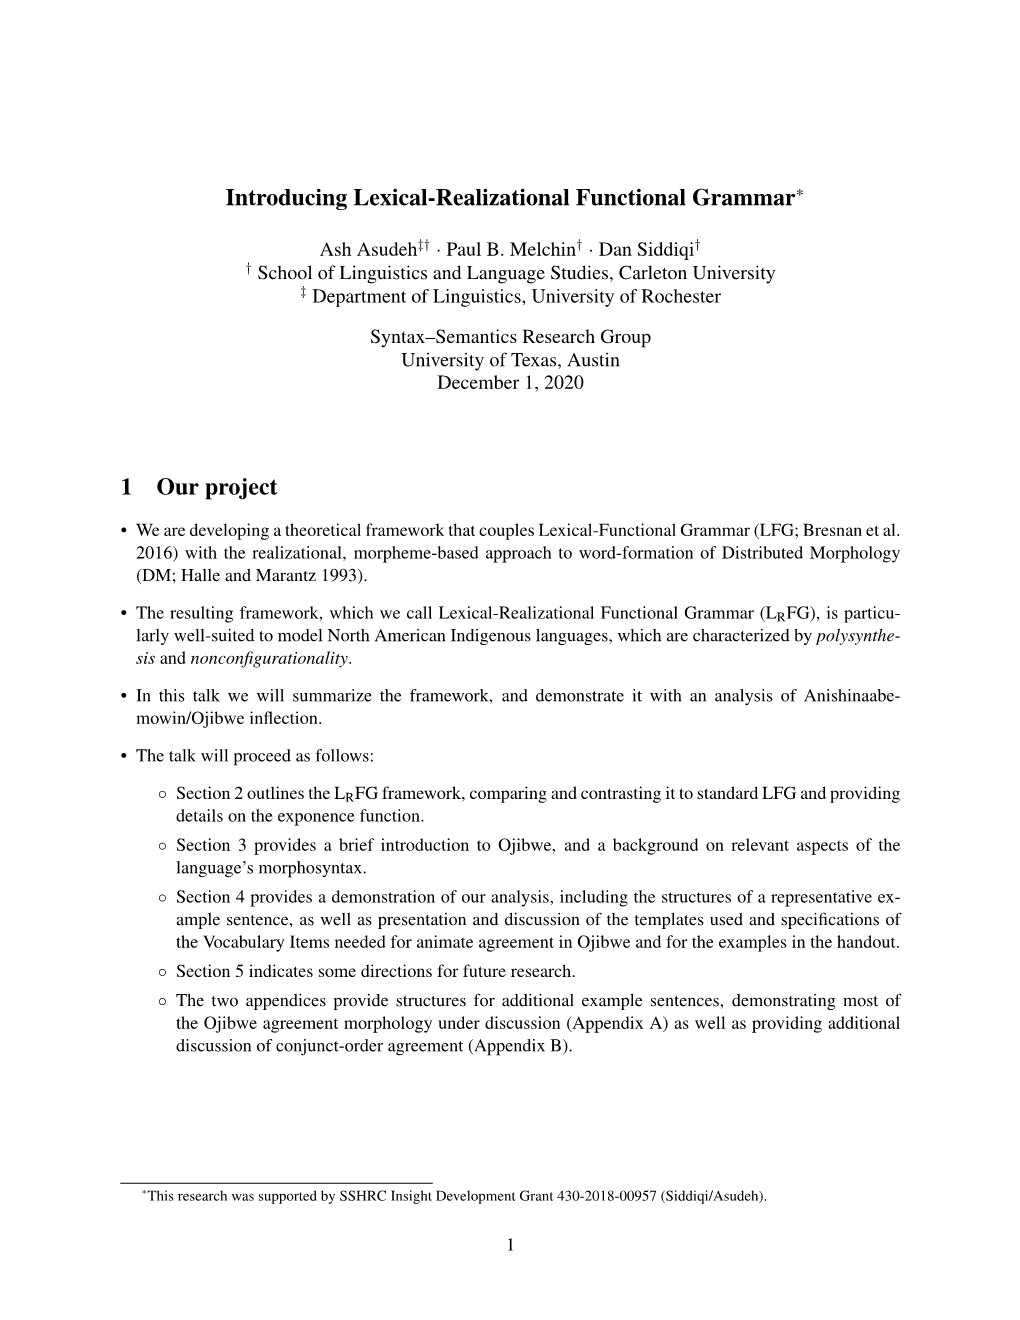 Introducing Lexical-Realizational Functional Grammar* 1 Our Project